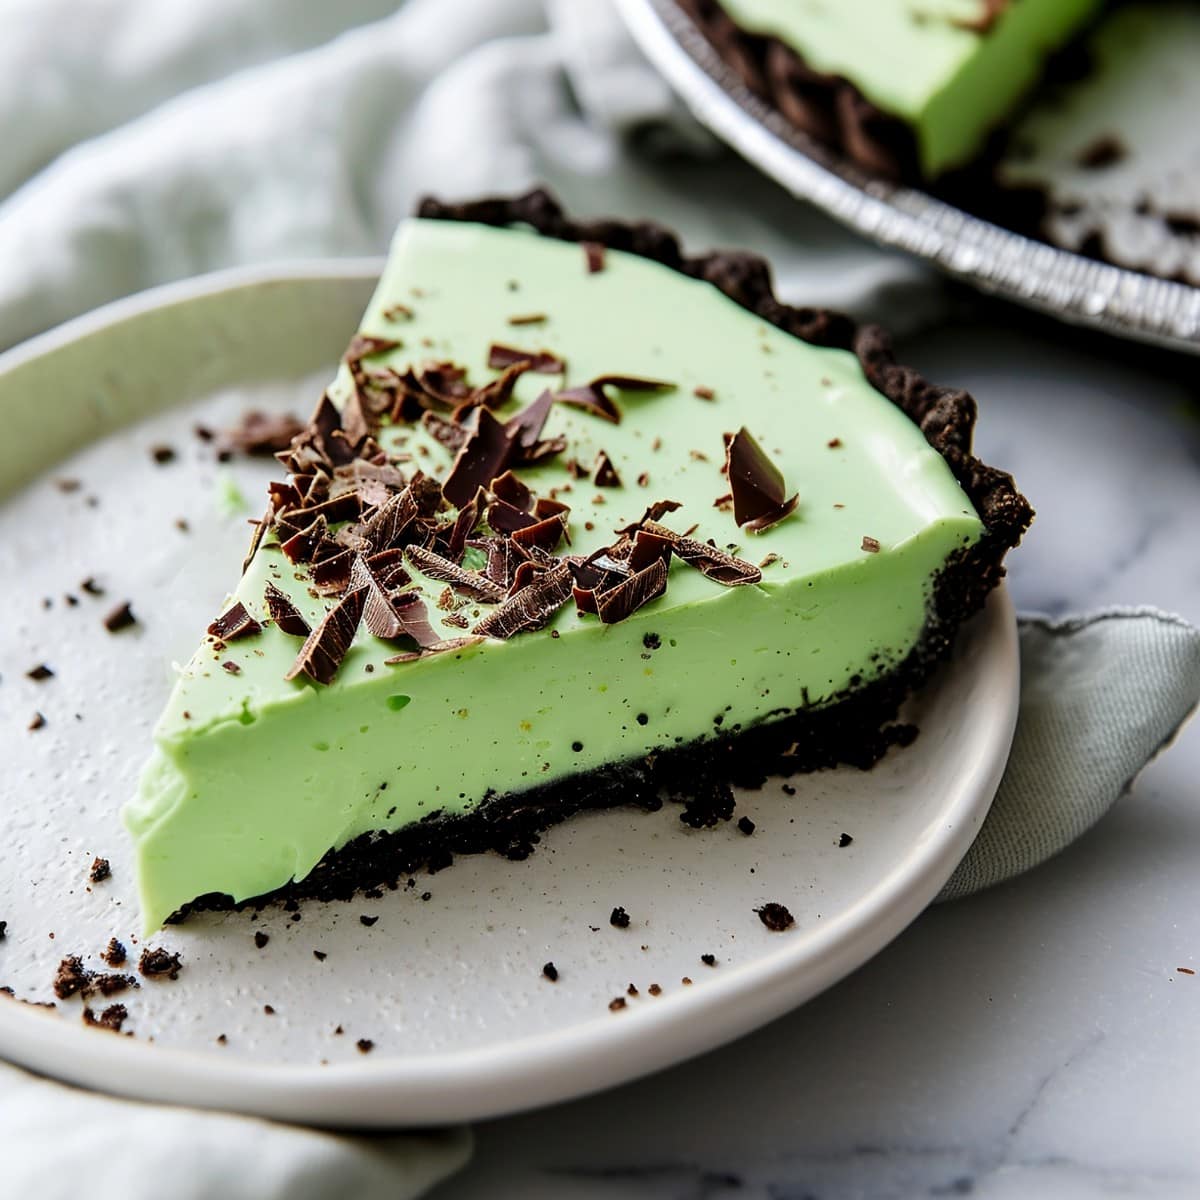 Indulgent grasshopper pie featuring a layer of minty filling topped with chocolate shavings